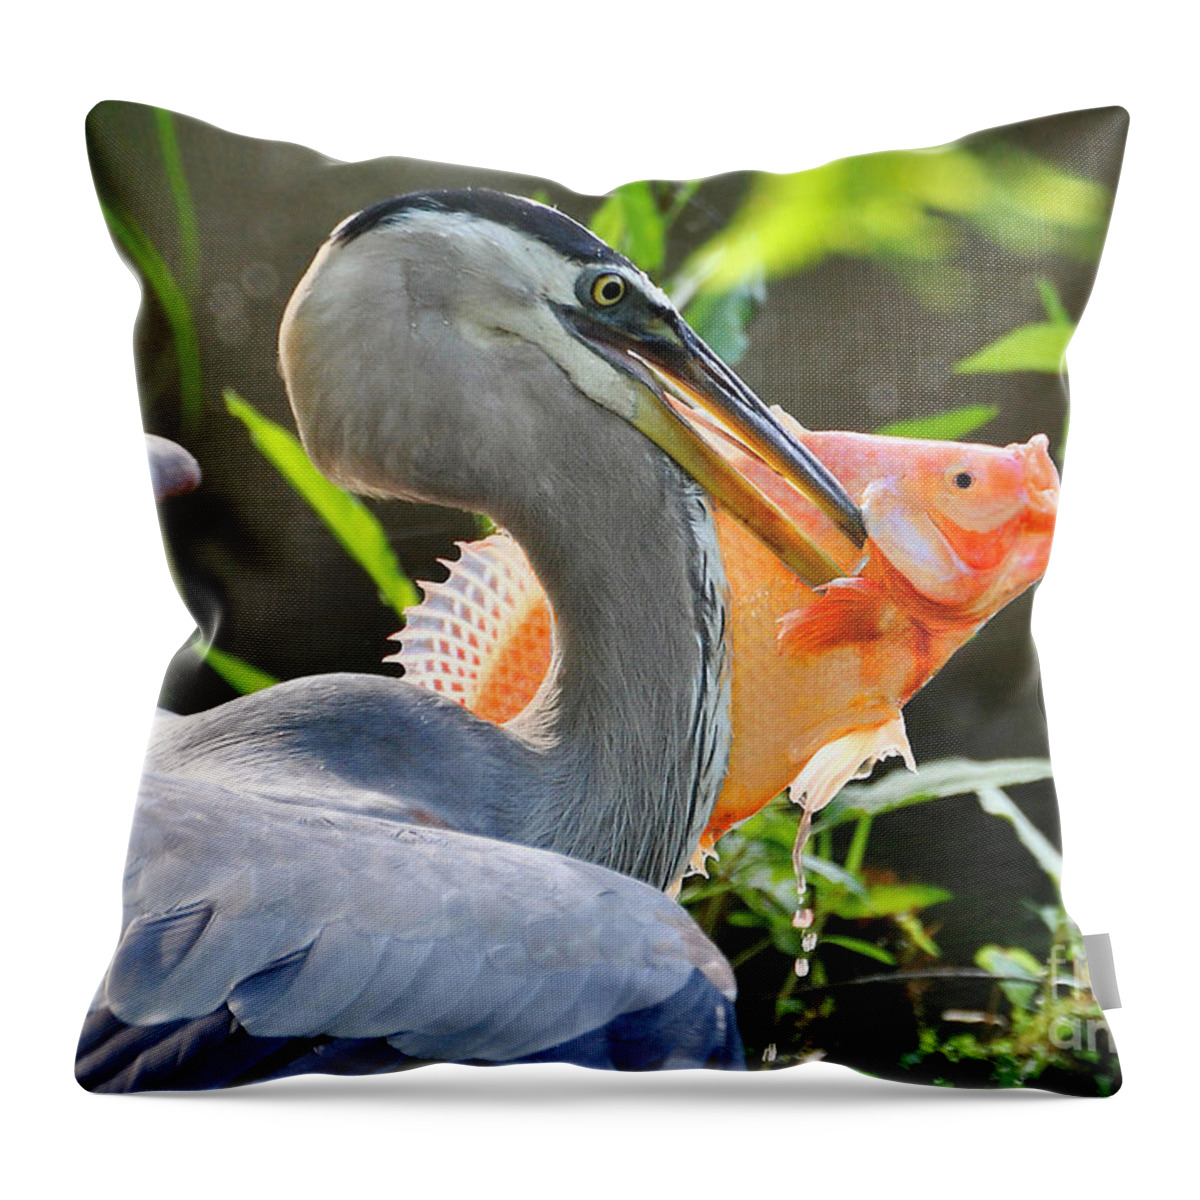 Heron Throw Pillow featuring the photograph The Bigger They Are The Harder It Is To Fly by Kathy Baccari